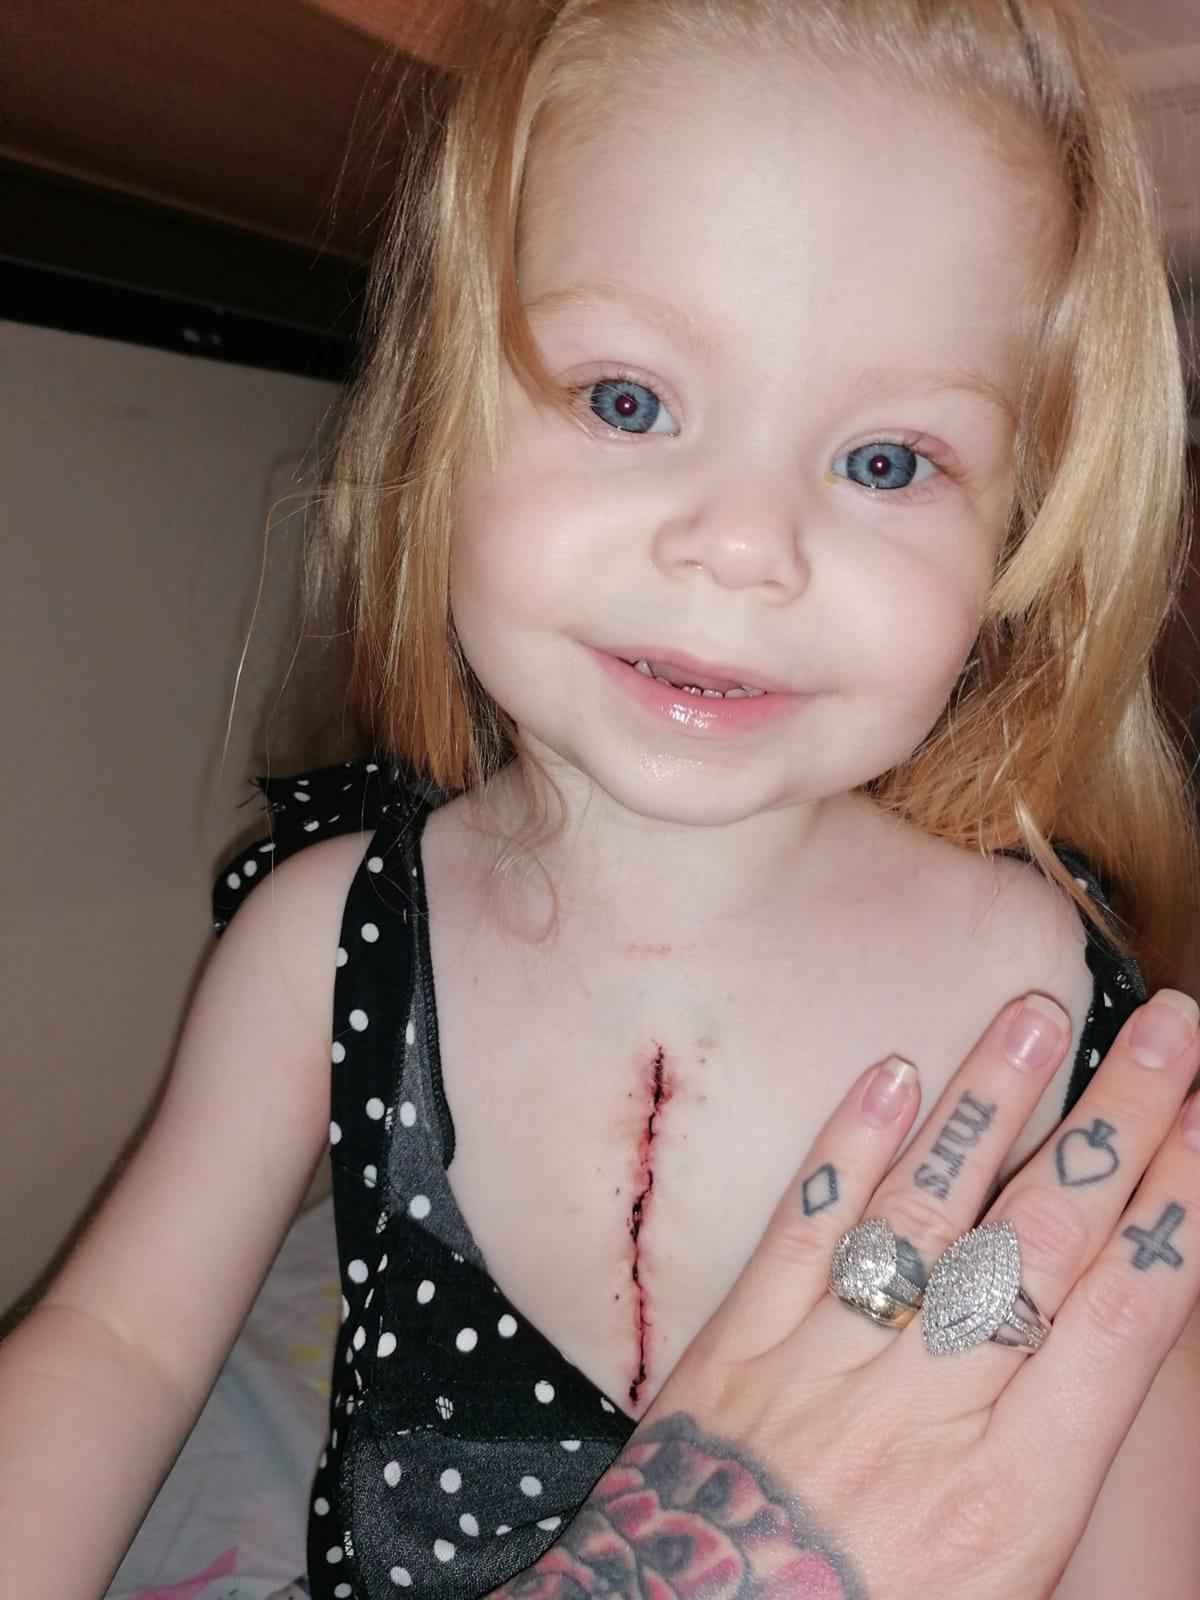 Lacey with a scar on her chest. (Caters News)